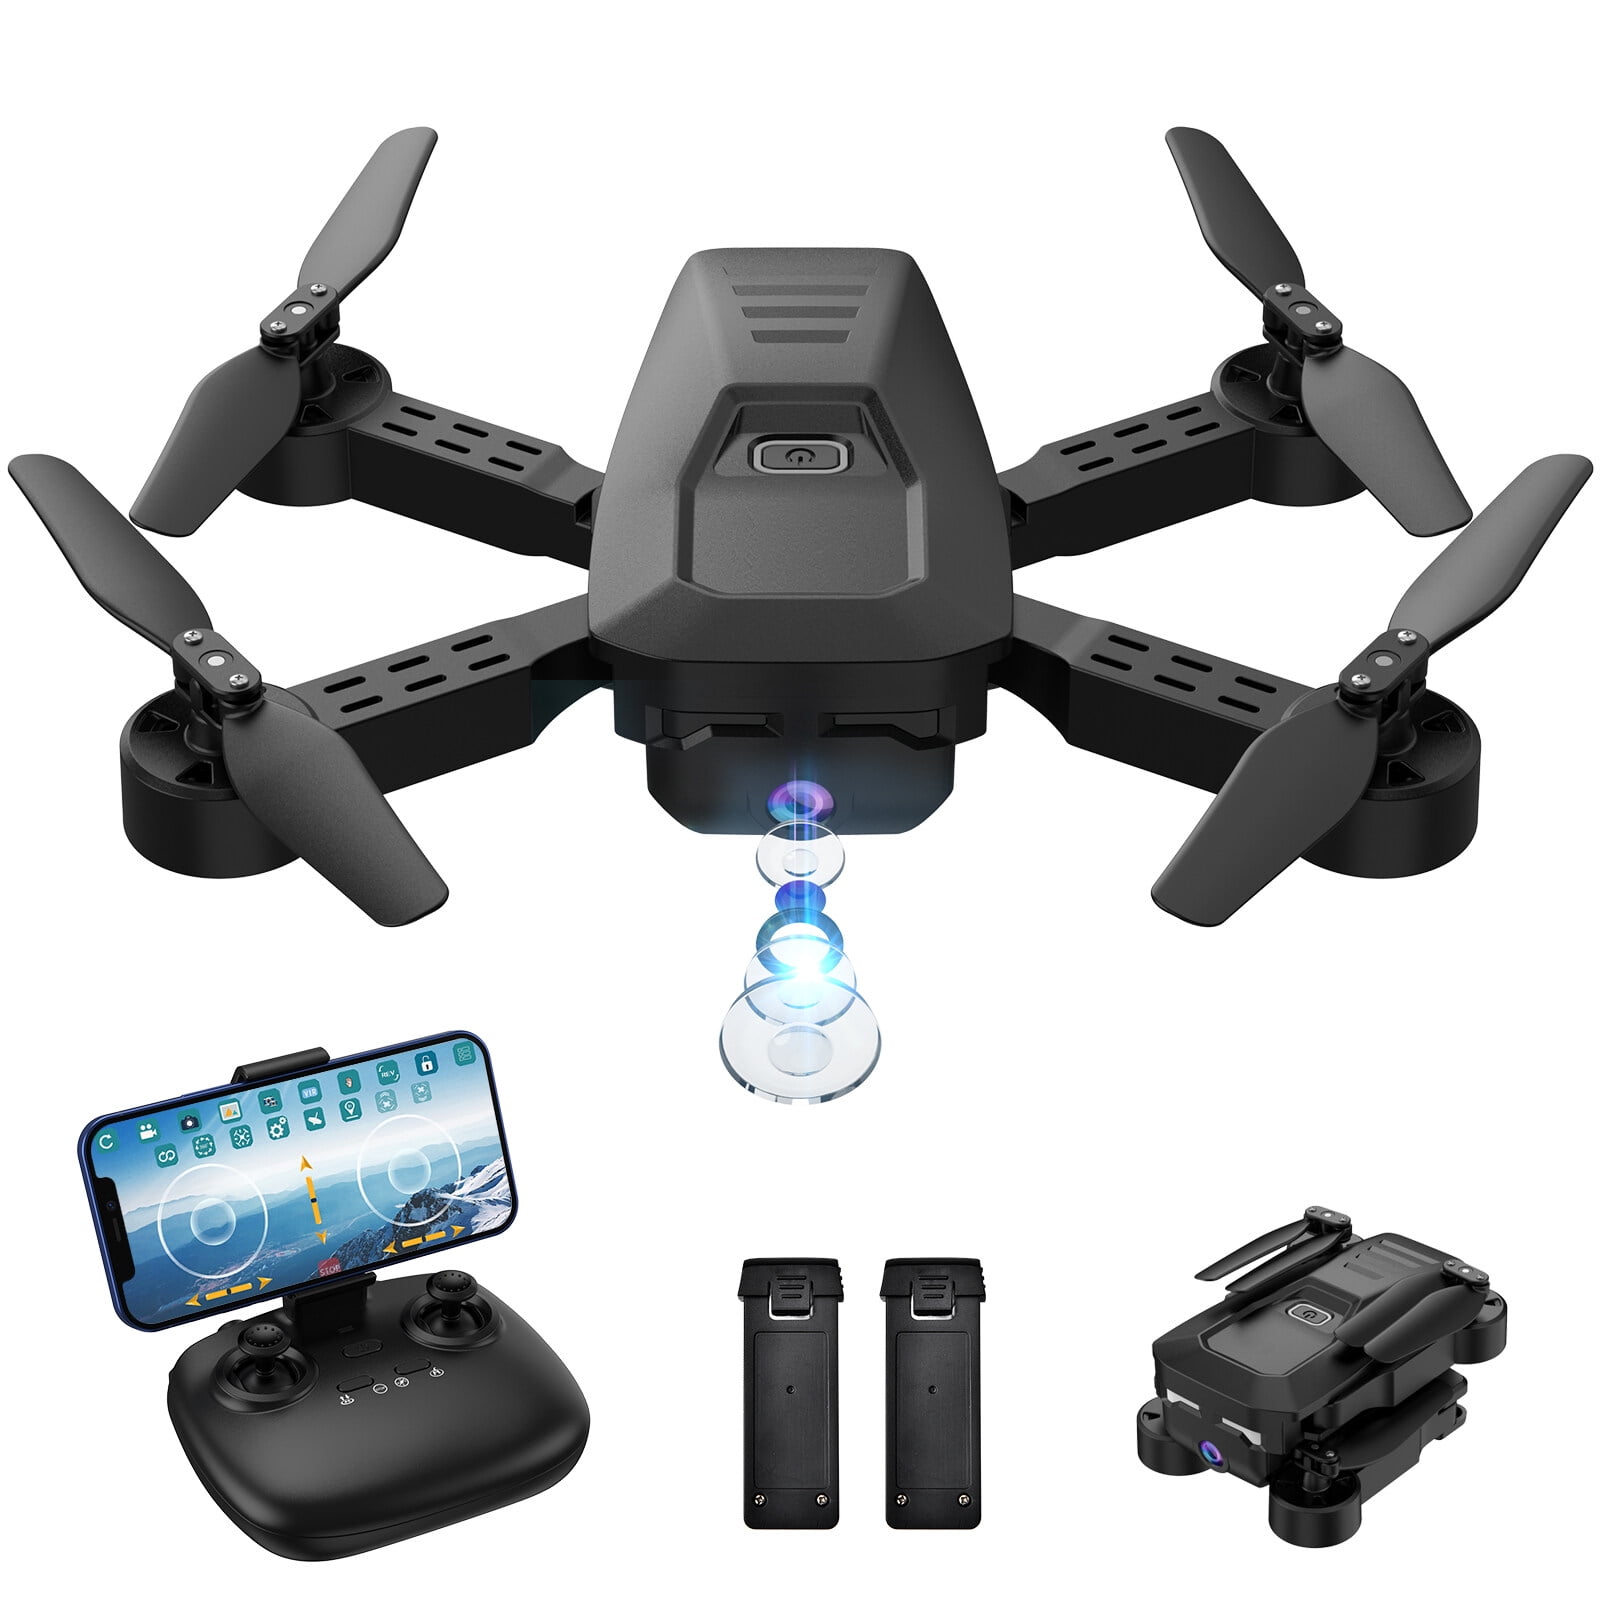 4K Drone with Three-Cameras, Foldable HD Fpv Drone Remote Control  Quadcopter Toys Gifts for Adult Beginners, With Phone Control, Battery,  Electronic